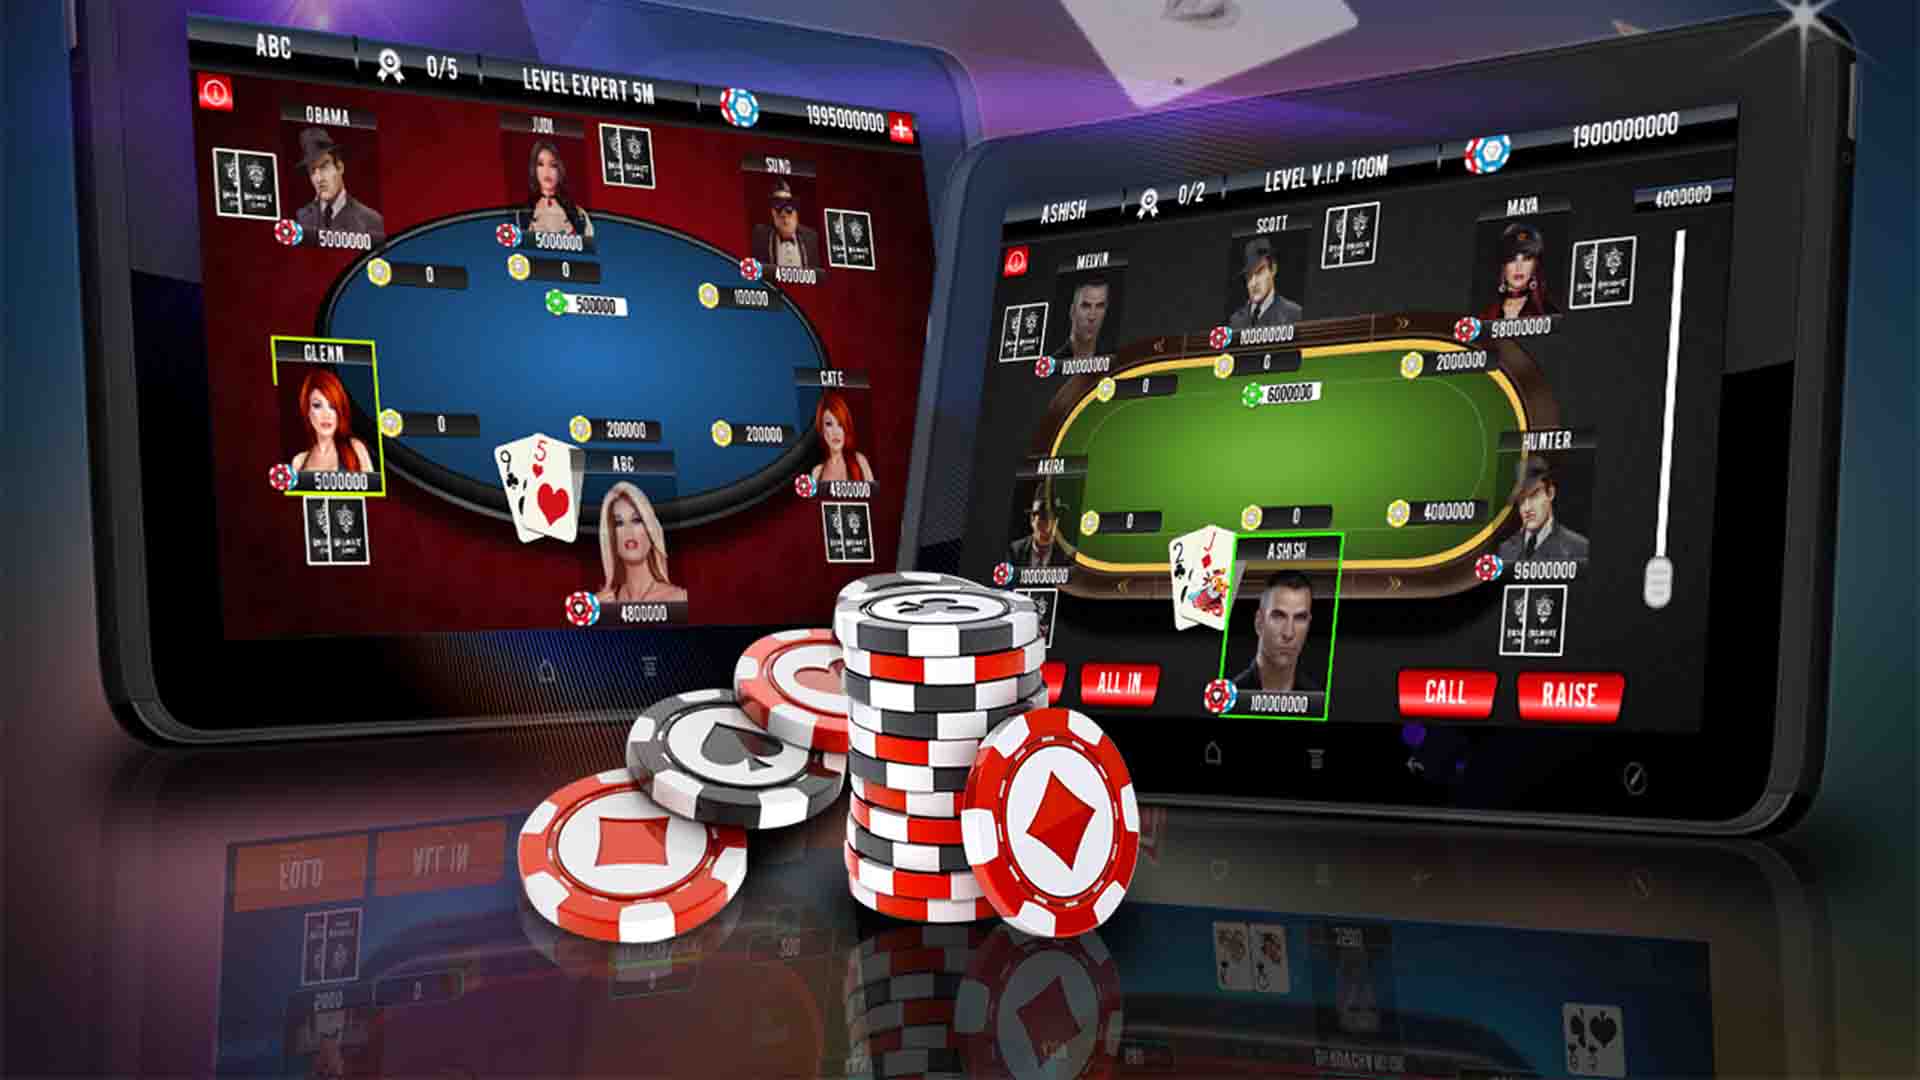 Enter the Online gambling site (situs judi online) and enjoy all the entertainment